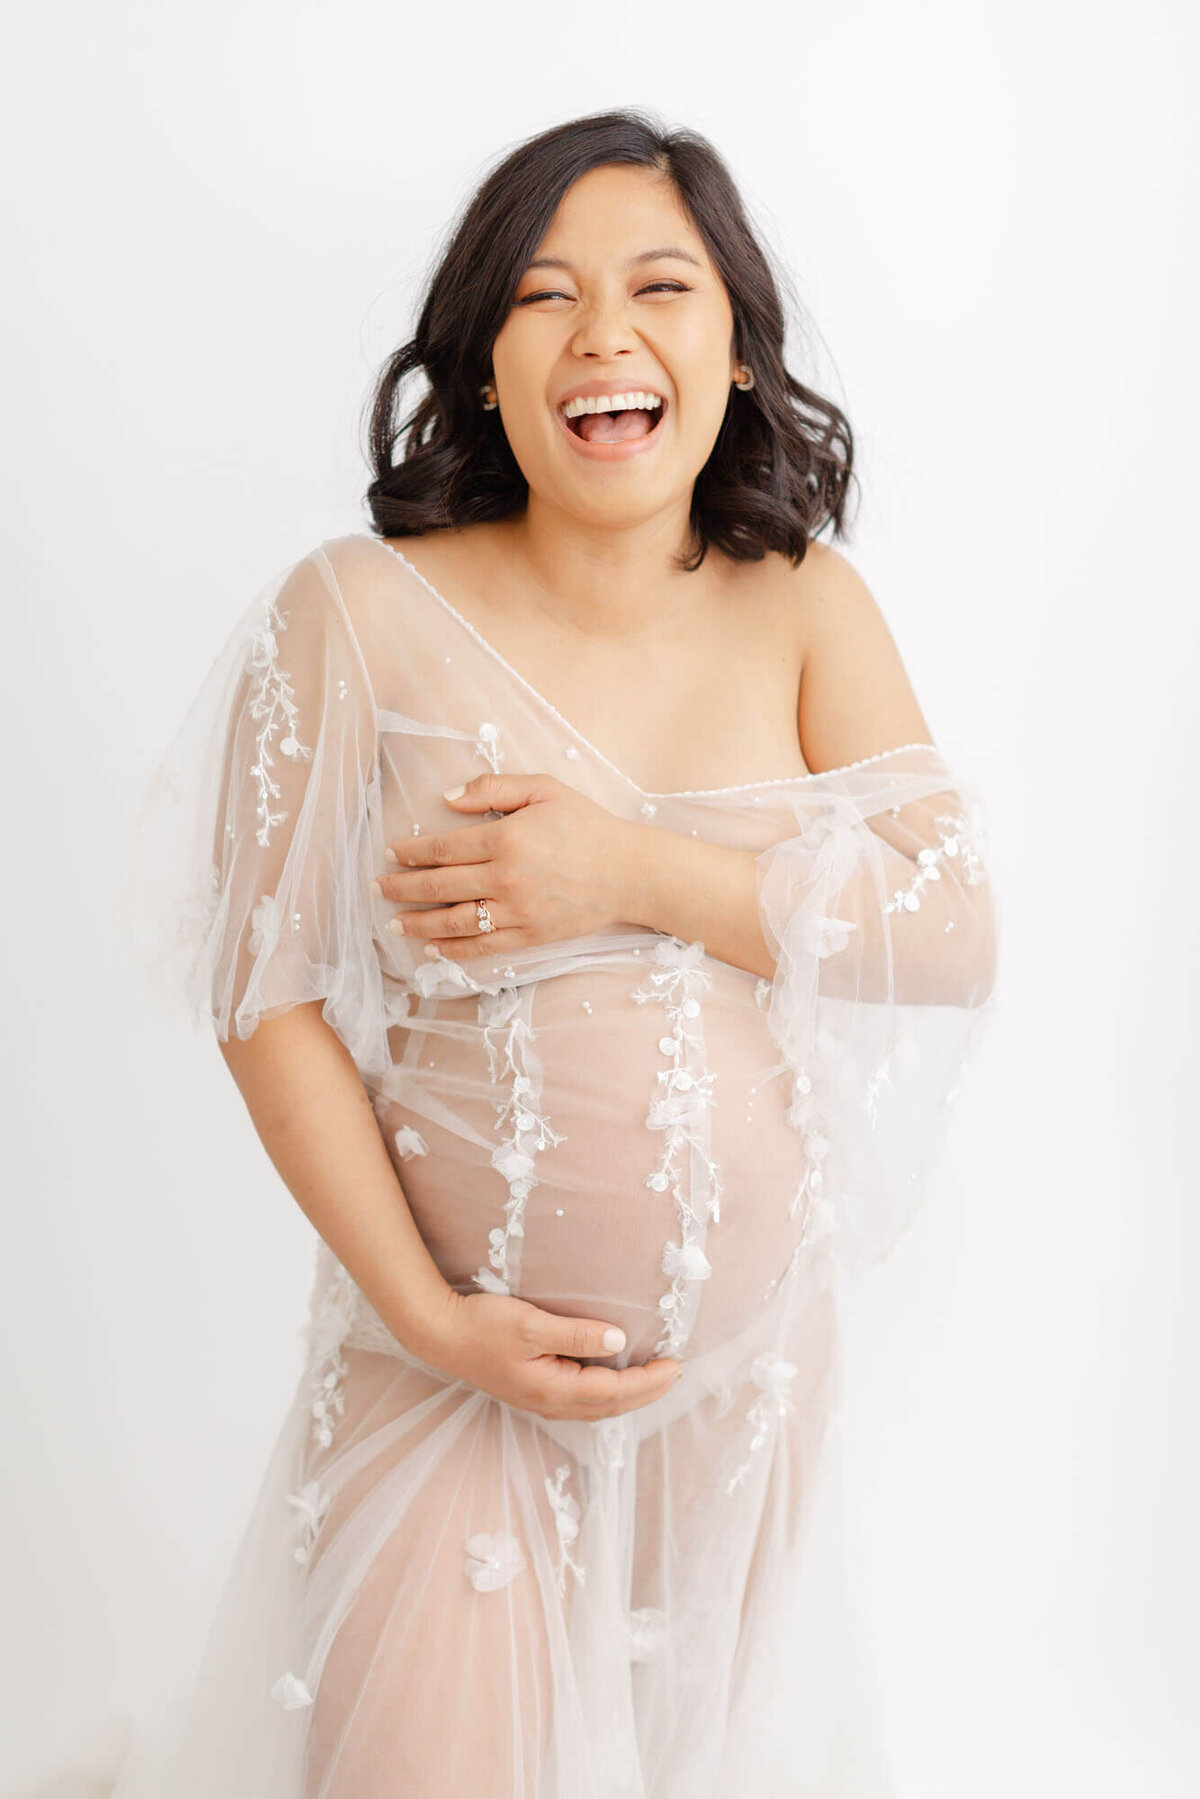 Pregnant Woman laughing big towards the camera. She has dark shoulder-length hair and is wearing a see-through tulle dress with some hand beaded work. She is holding her chest with one arm and holding her belly with the other hand.